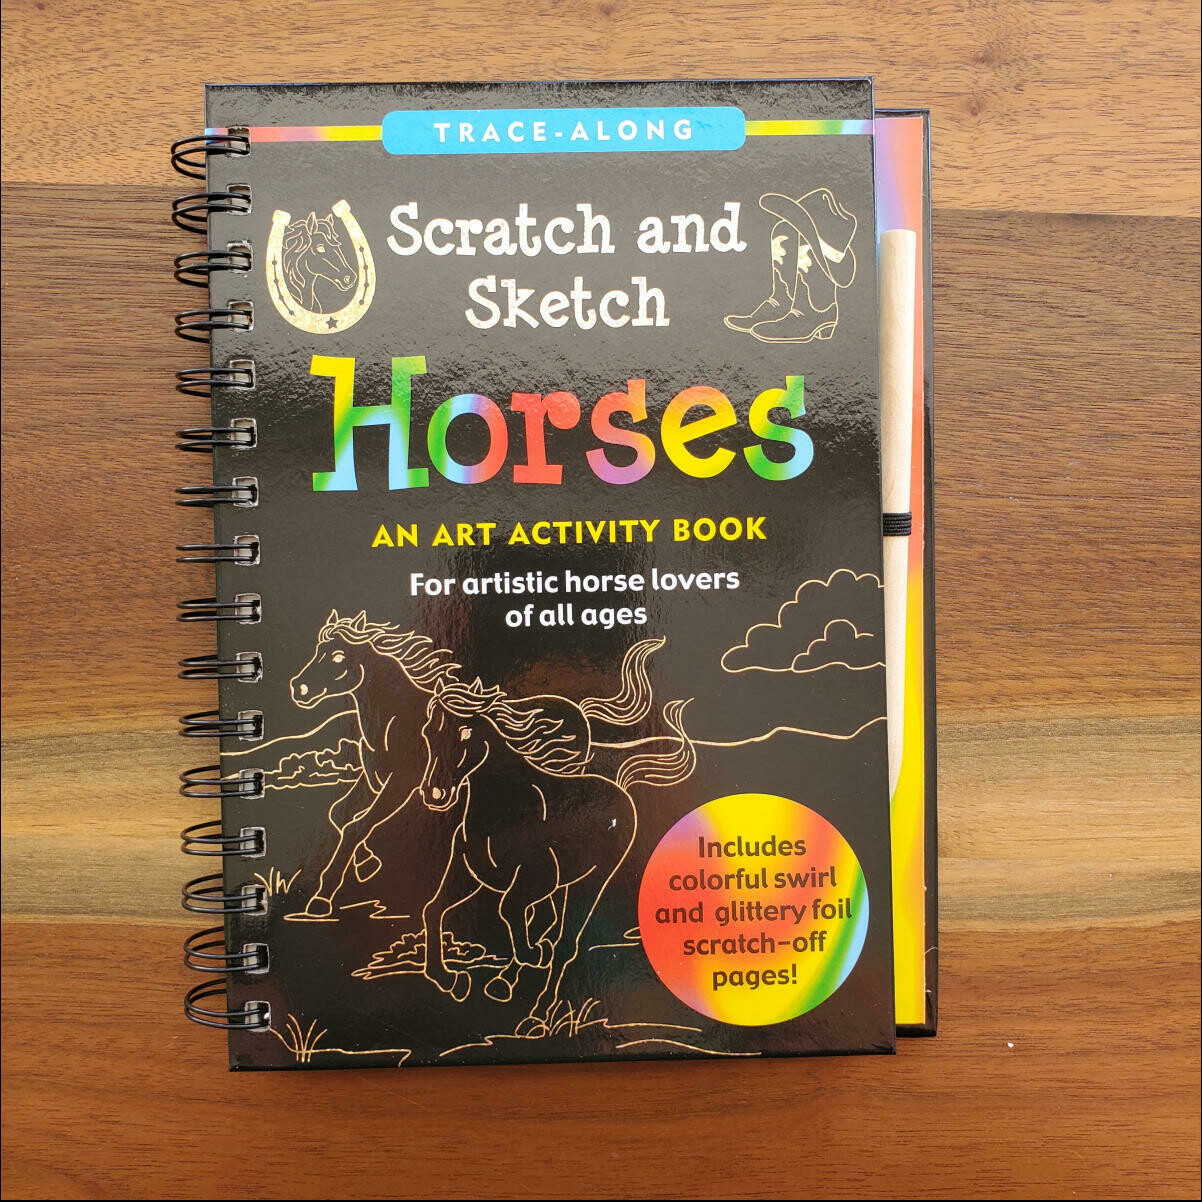 Peter Pauper Press Trace-Along Scratch and Sketch Horses